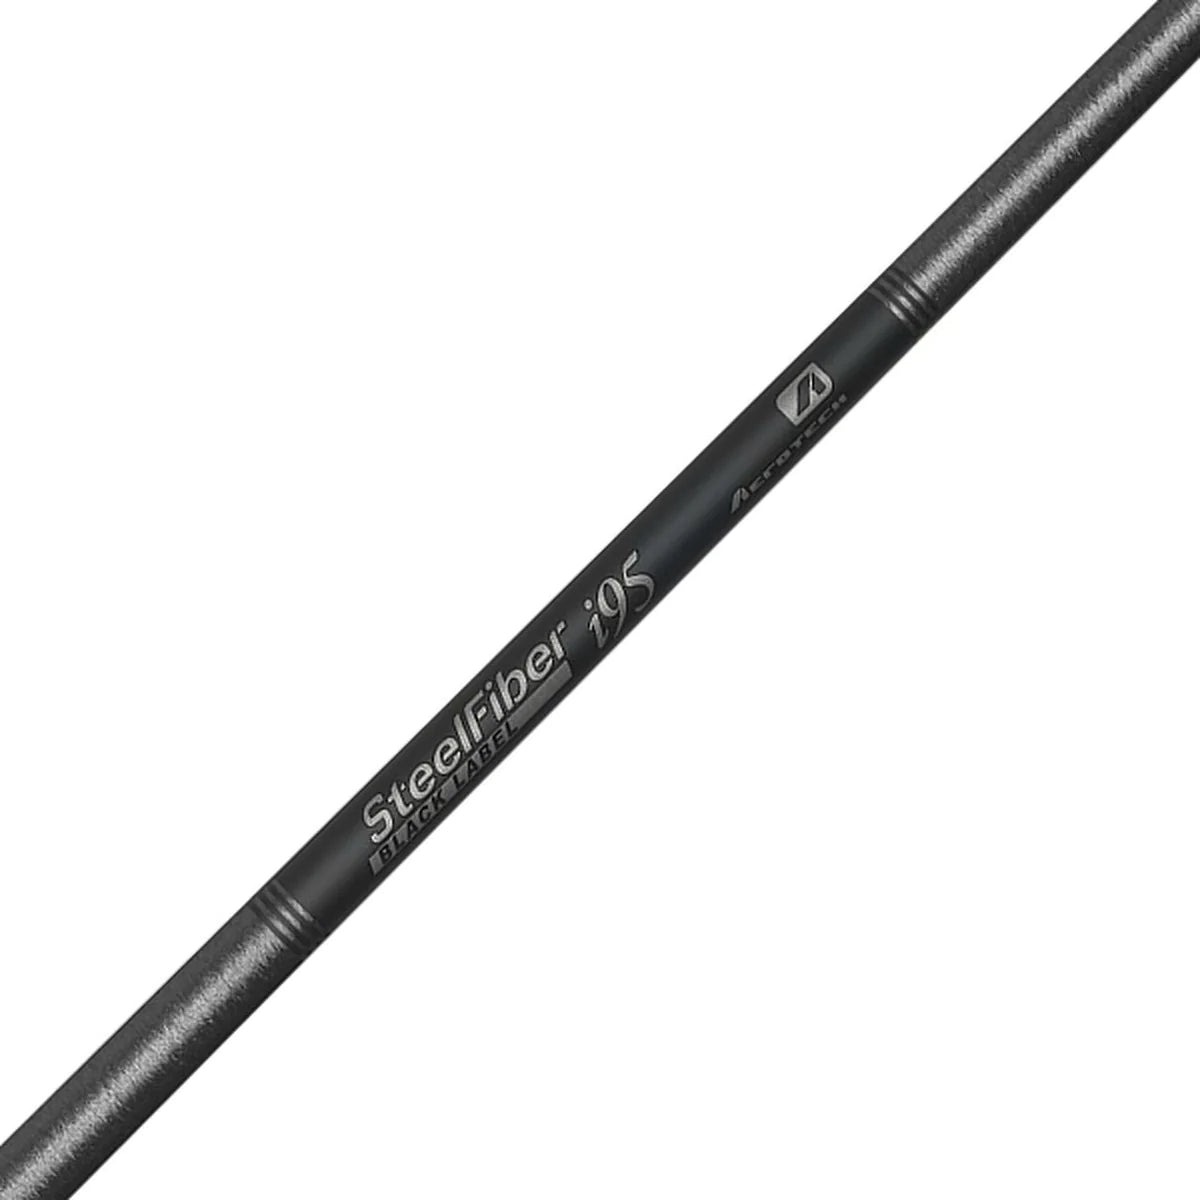 AREOTECH STEELFIBER BLACK LABEL PRIVATE RESERVE I95 IRON SHAFT .370